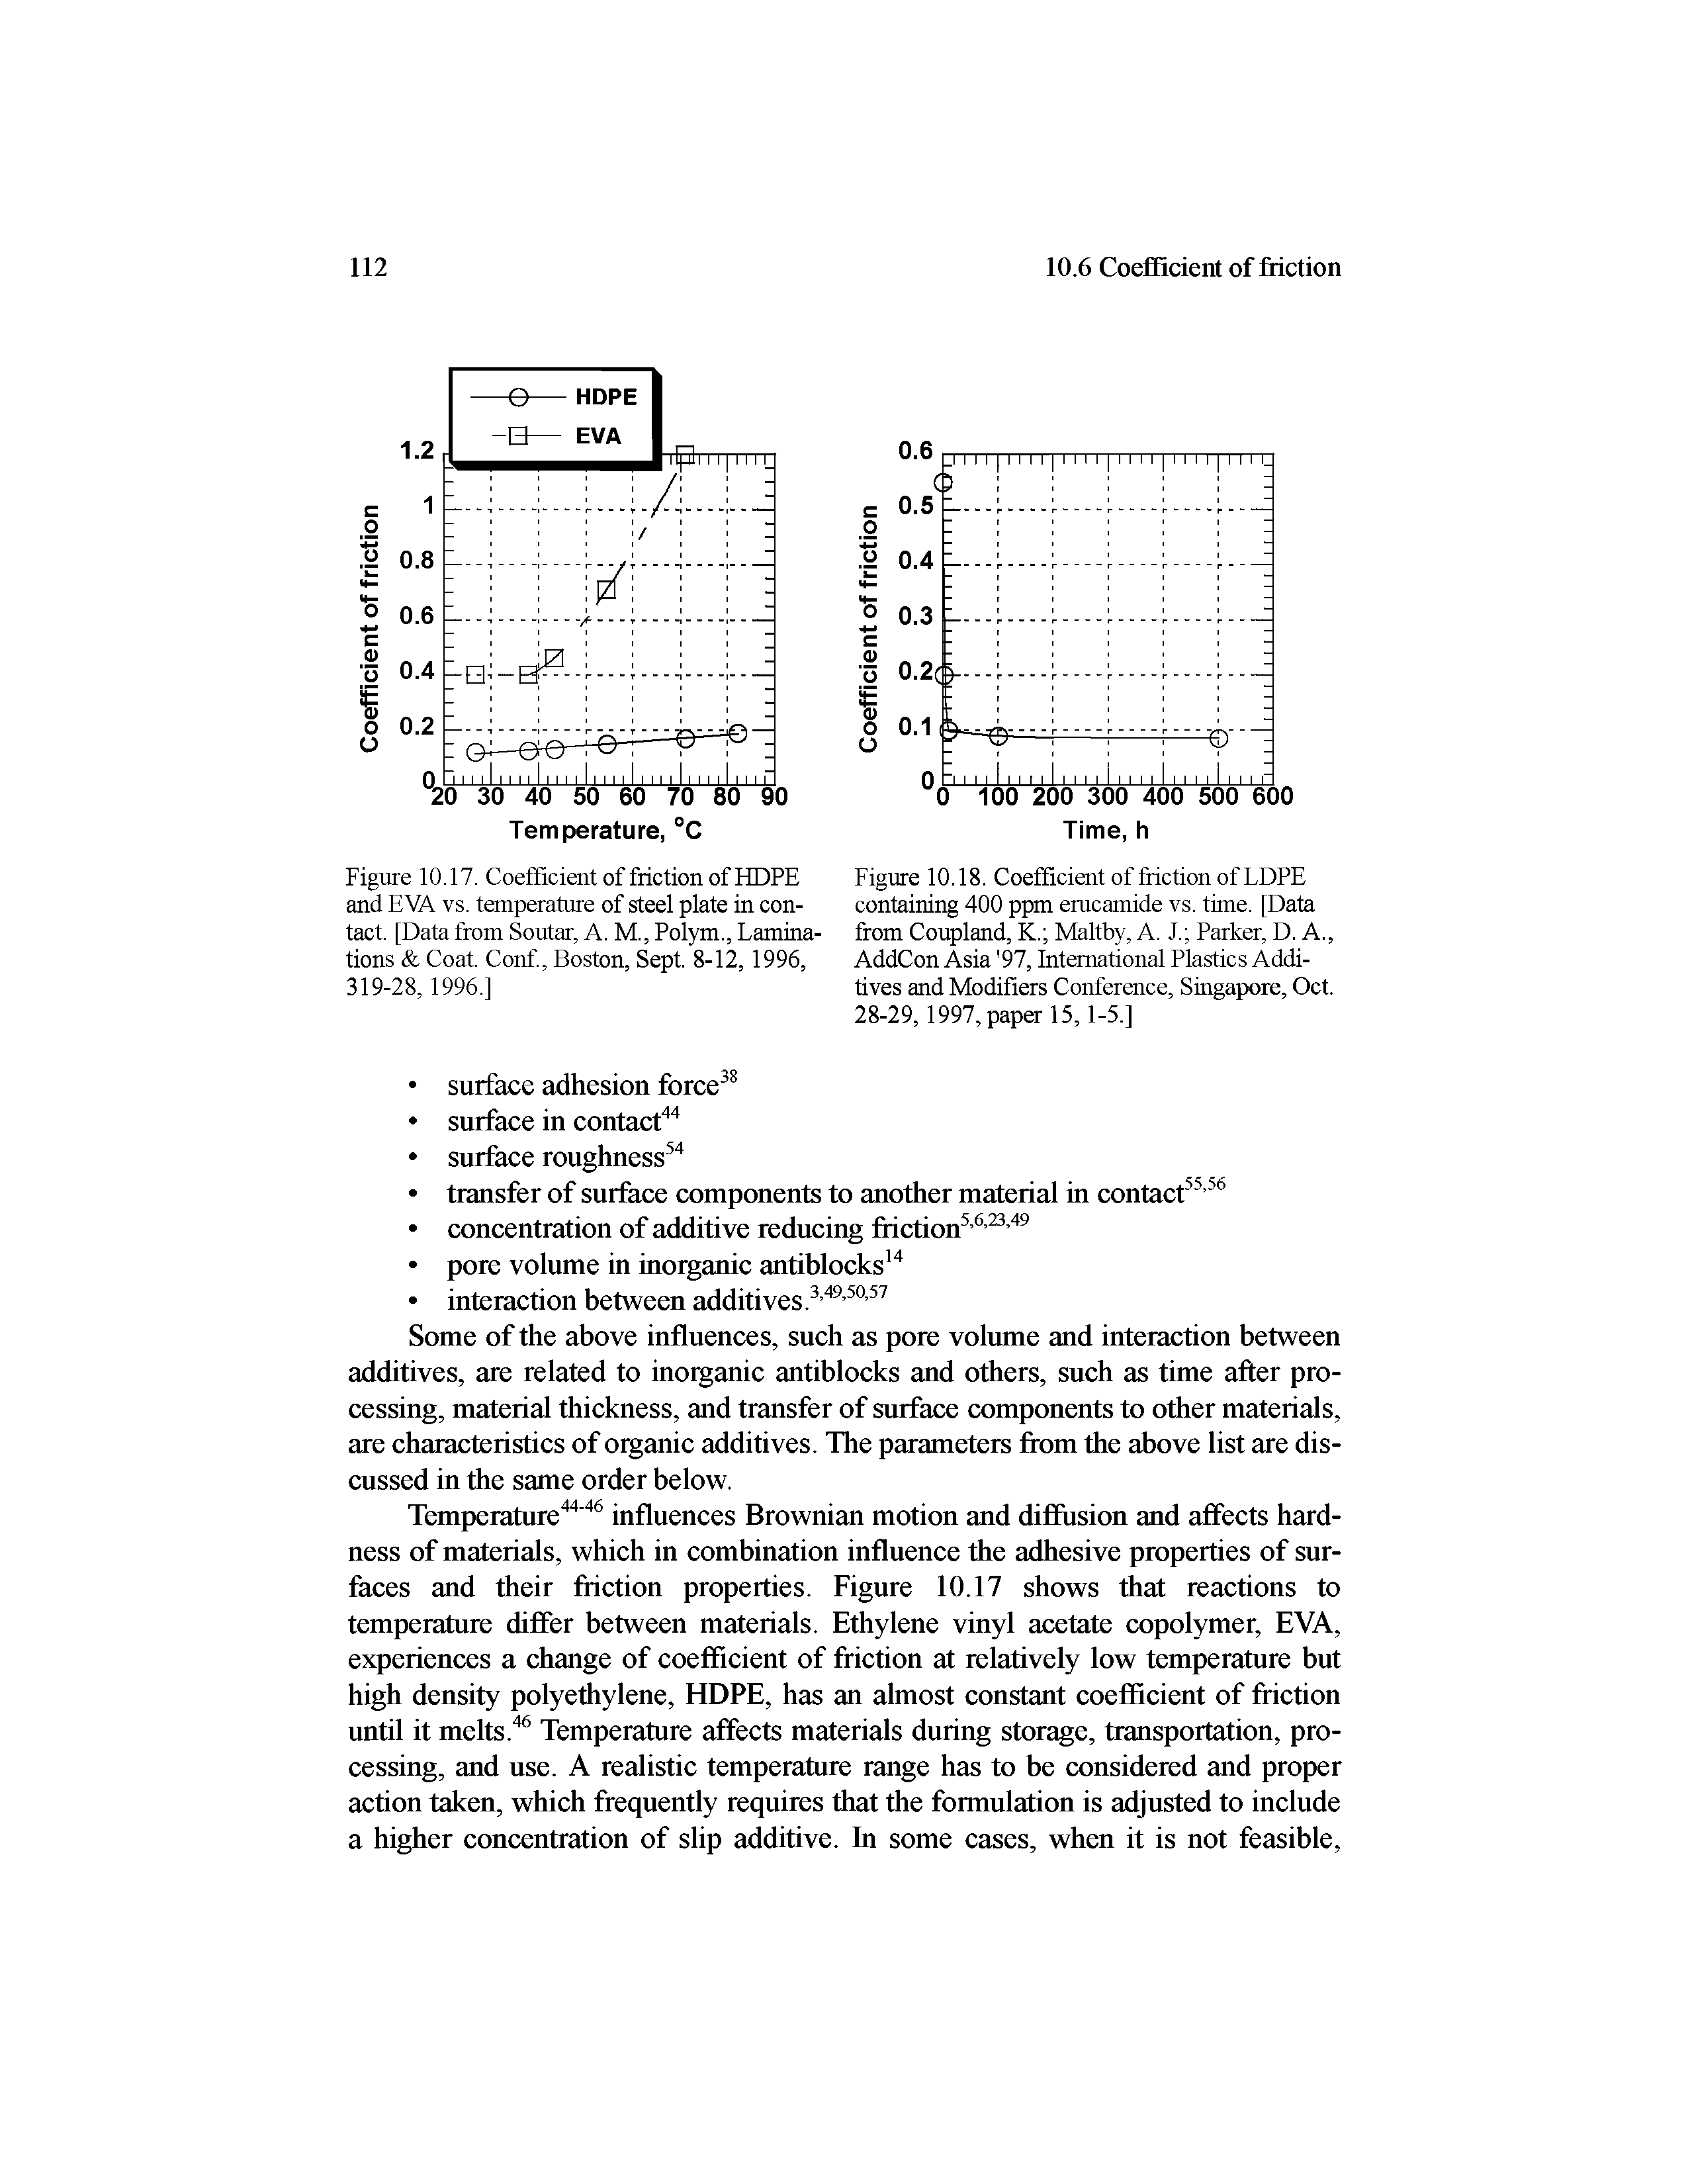 Figure 10.17. Coefficient of friction of HDPE and EVA vs. temperature of steel plate in contact. [Data from Soutar, A. M., Polym., Laminations Coat. Conf, Boston, Sept. 8-12,1996, 319-28,1996.1...